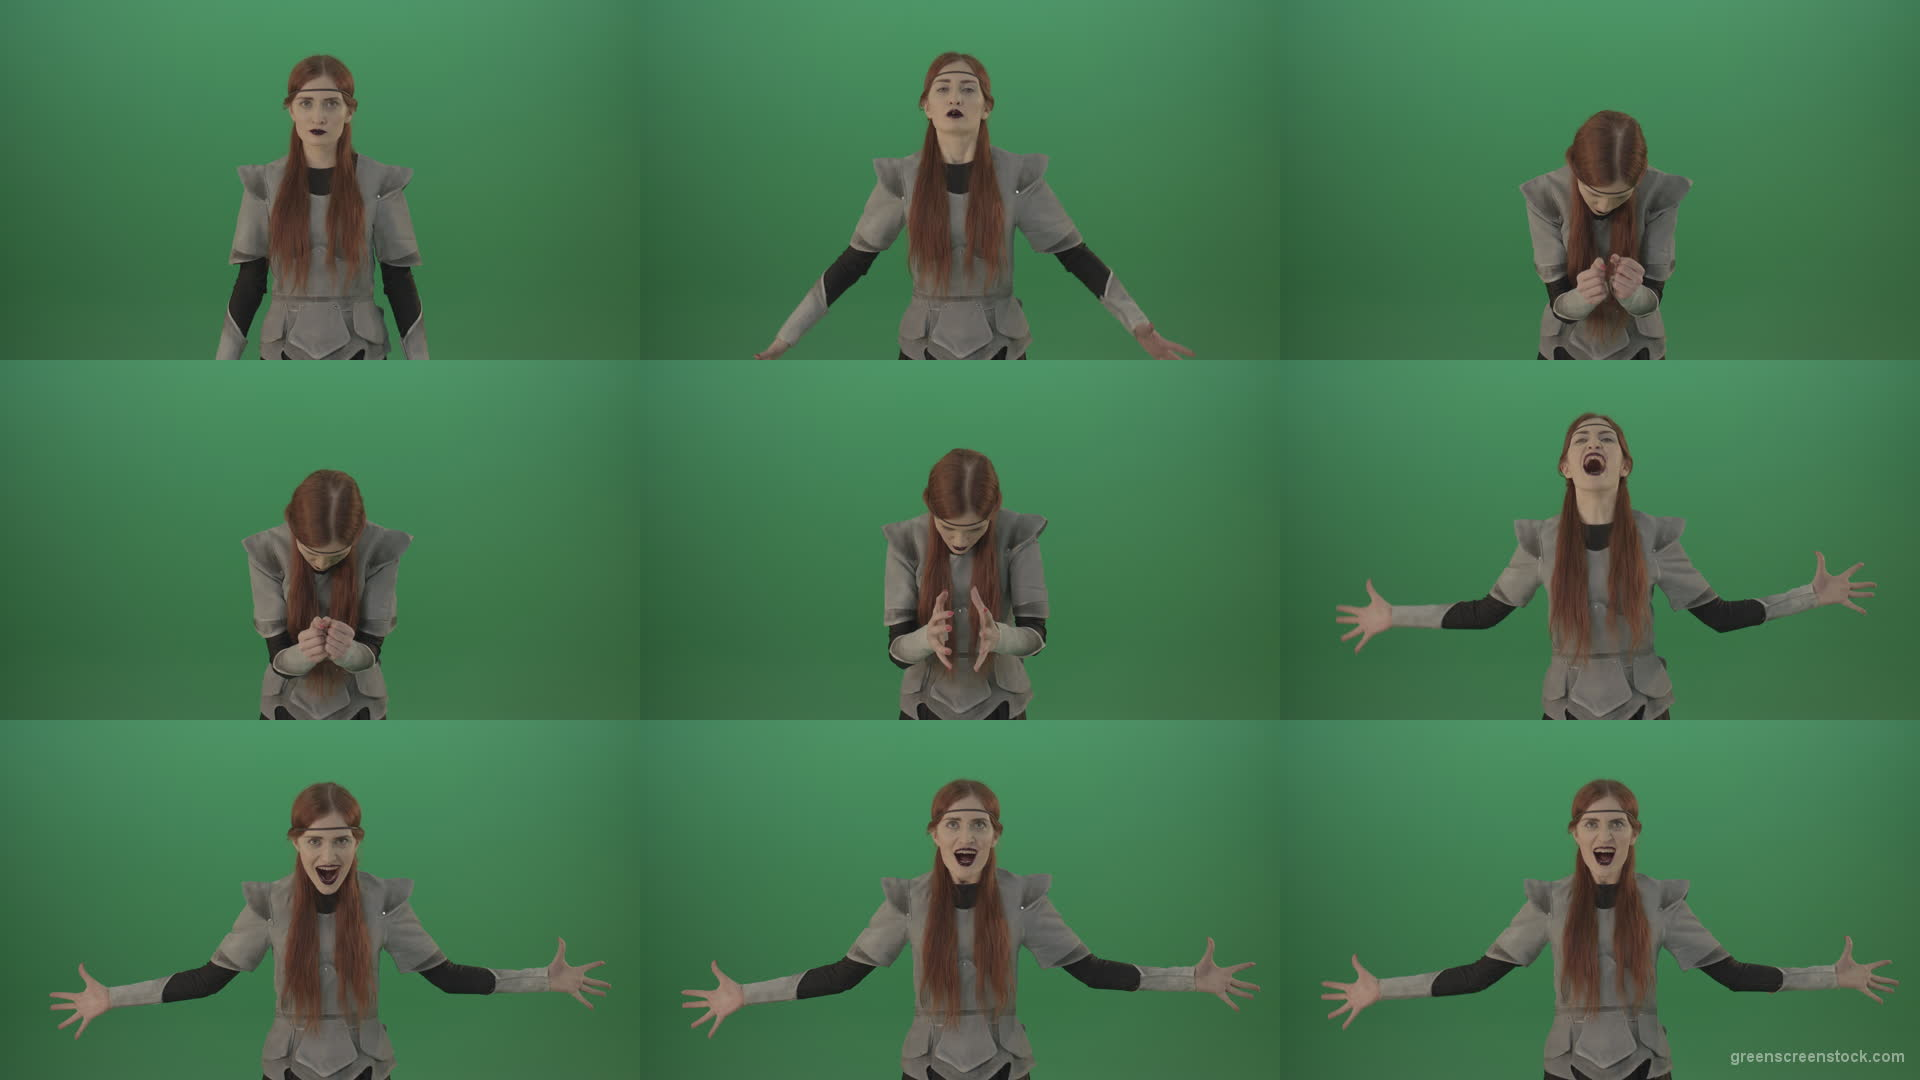 Witch-draws-the-power-of-the-whole-world-releases-it-from-the-outside-and-shouts-ominously-magic-on-a-green-background. Green Screen Stock